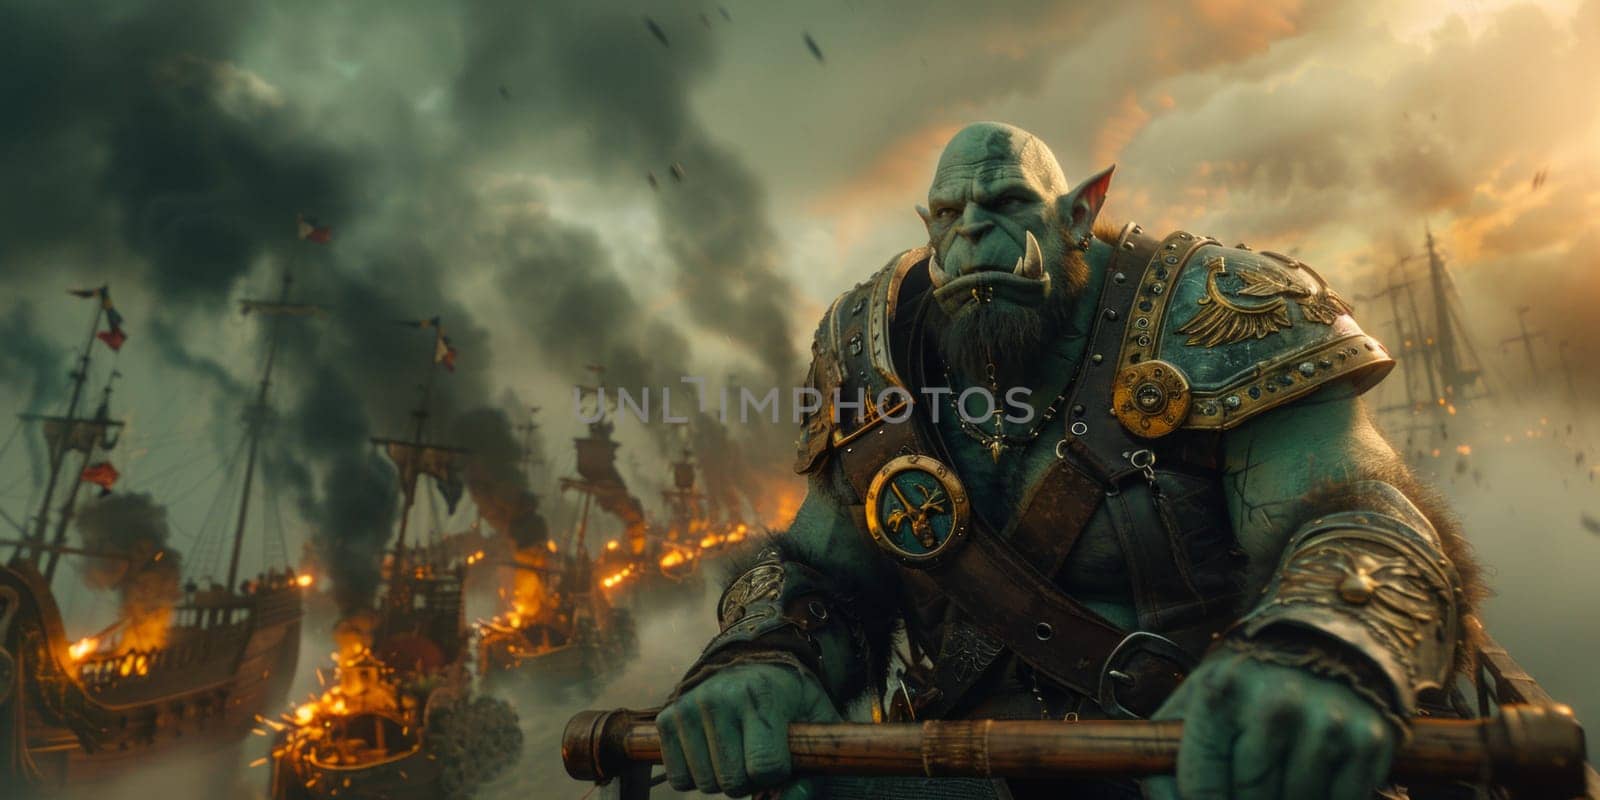 A brave man in armor stands tall, wielding a sword, in front of a vast flotilla of ships. As if protecting the fleet from an unseen threat, he exudes strength and determination by but_photo